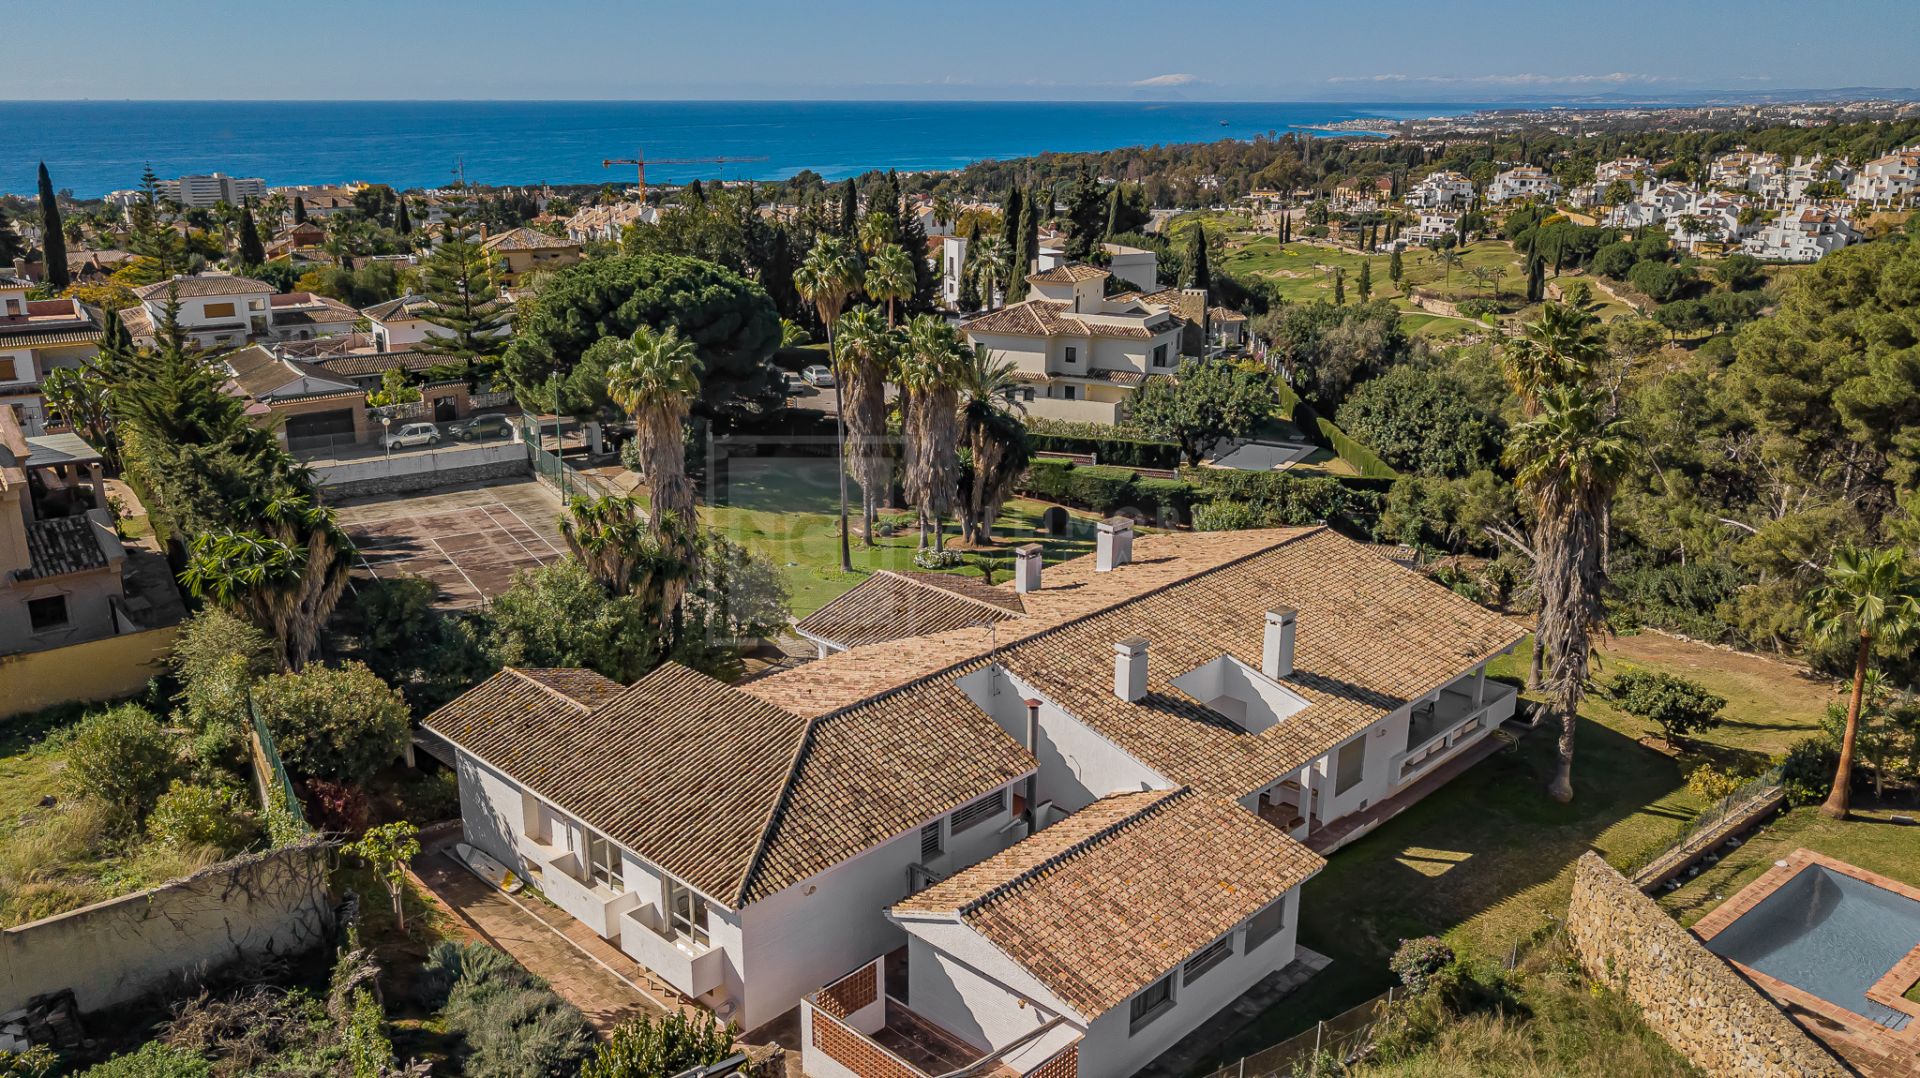 EXCELLENT INVESTMENT PROPERTY 7-BEDROOM PROPERTY ABOVE MARBELLA CENTRE